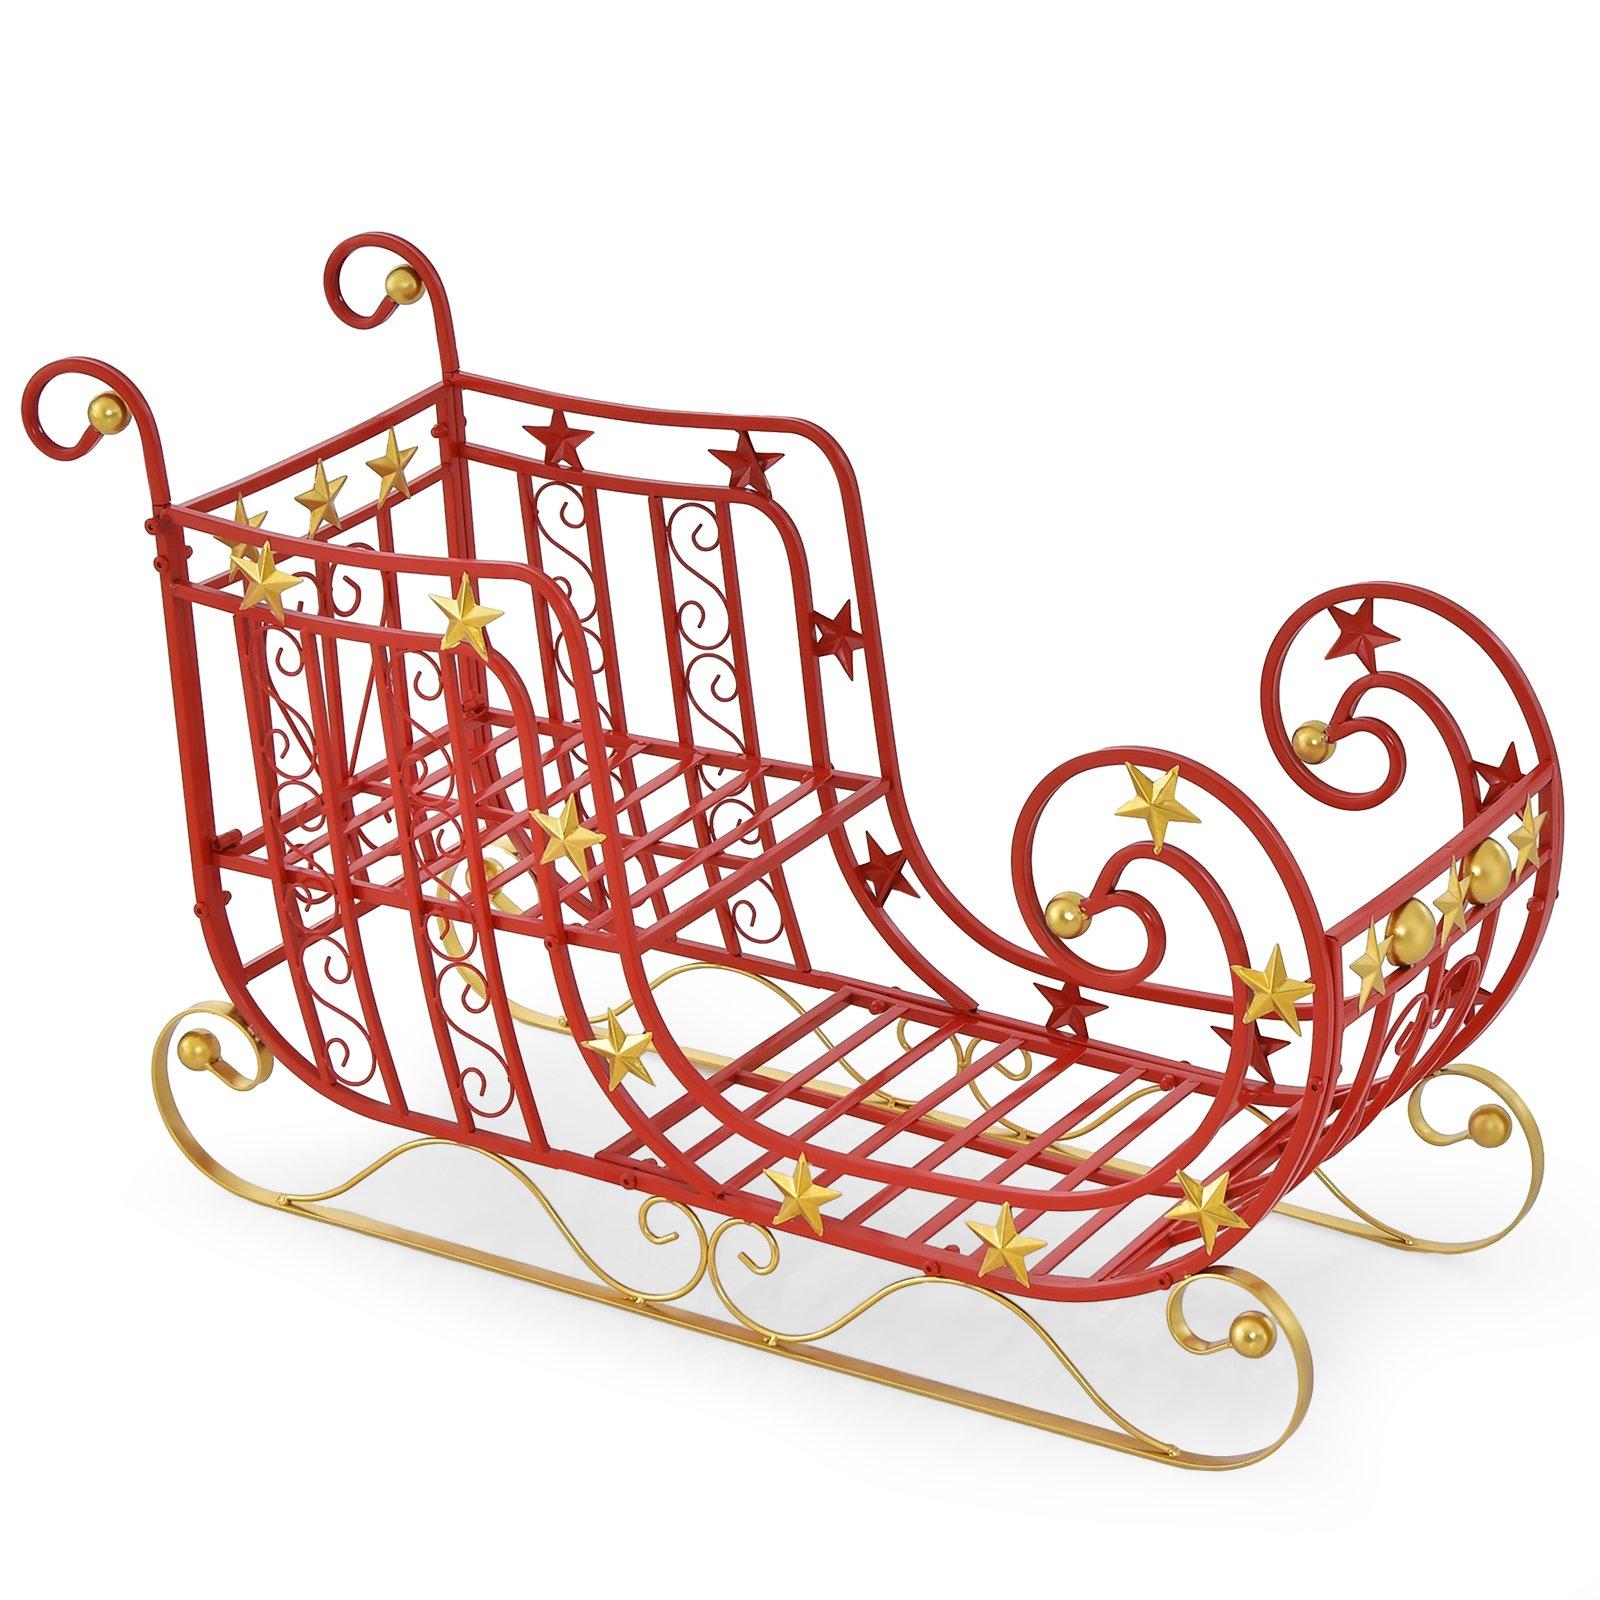 Red Santa Sleigh Metal Christmas Santa Sleigh w/ Large Cargo Area for Gifts